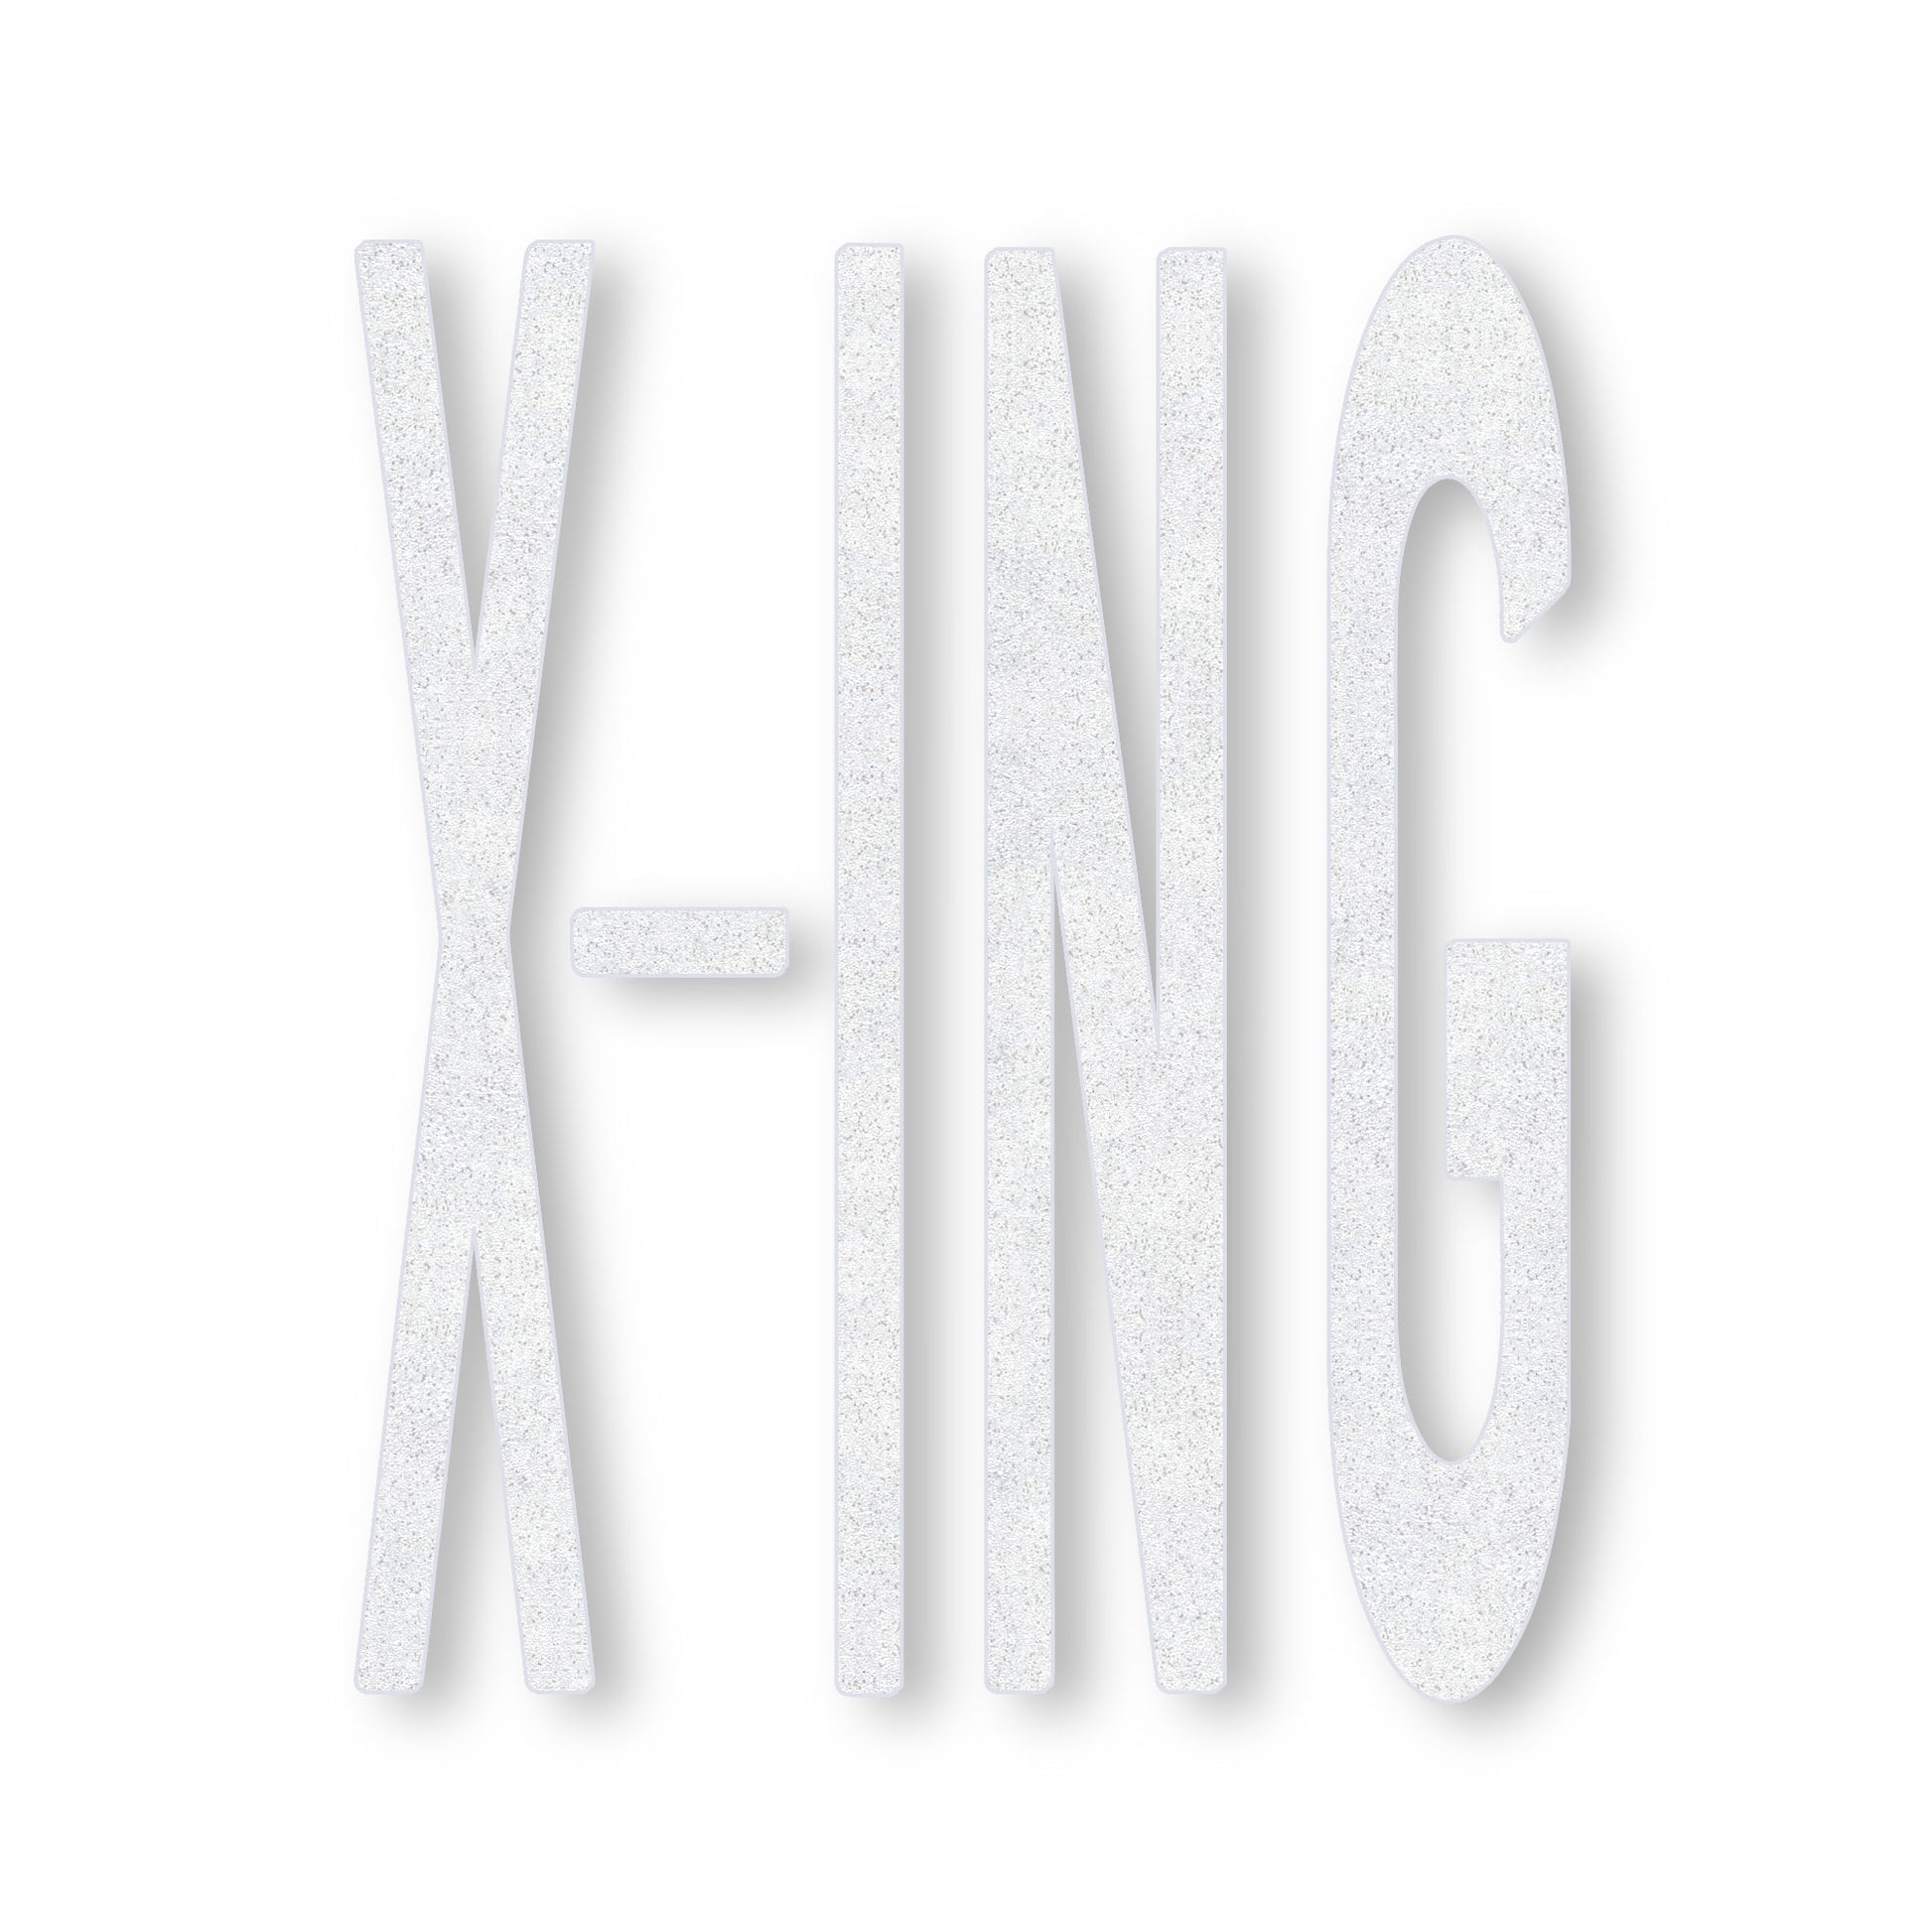 X-ING in all caps in white